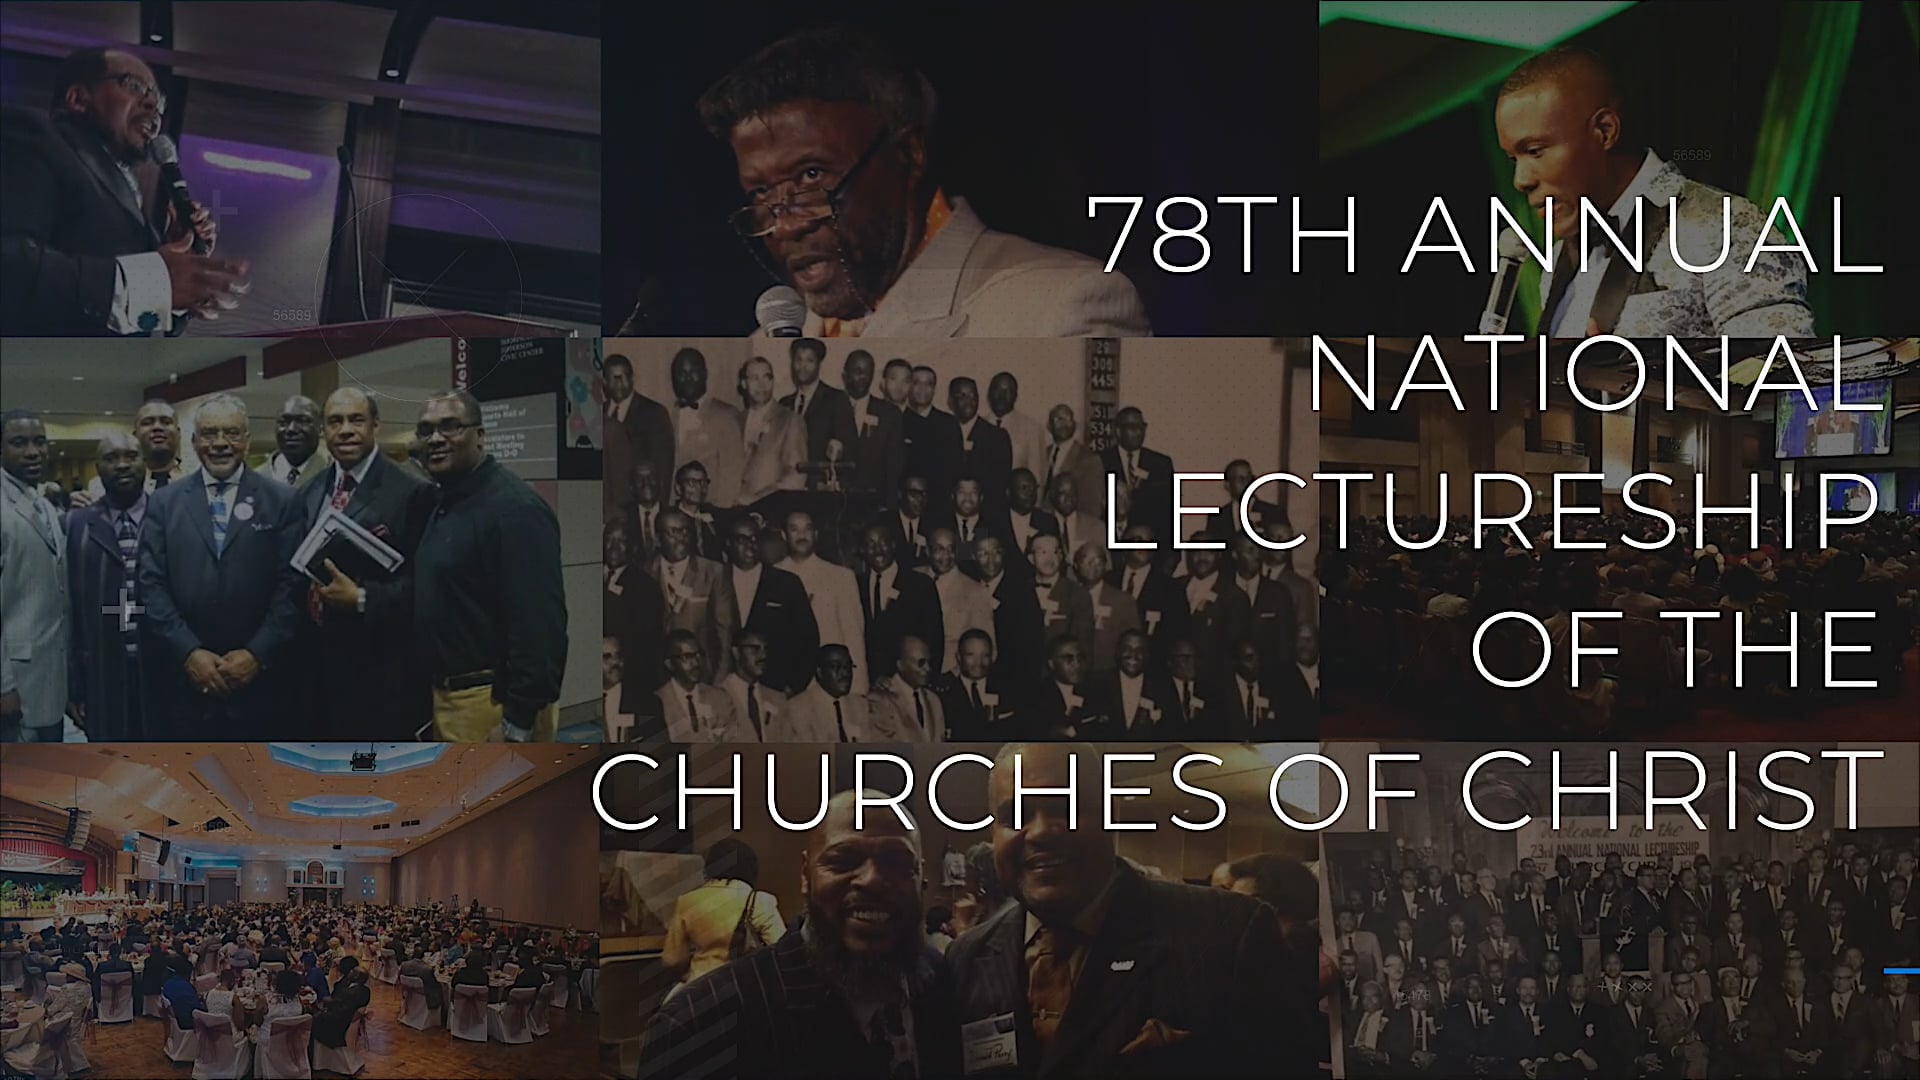 Church of Christ National Lectureship